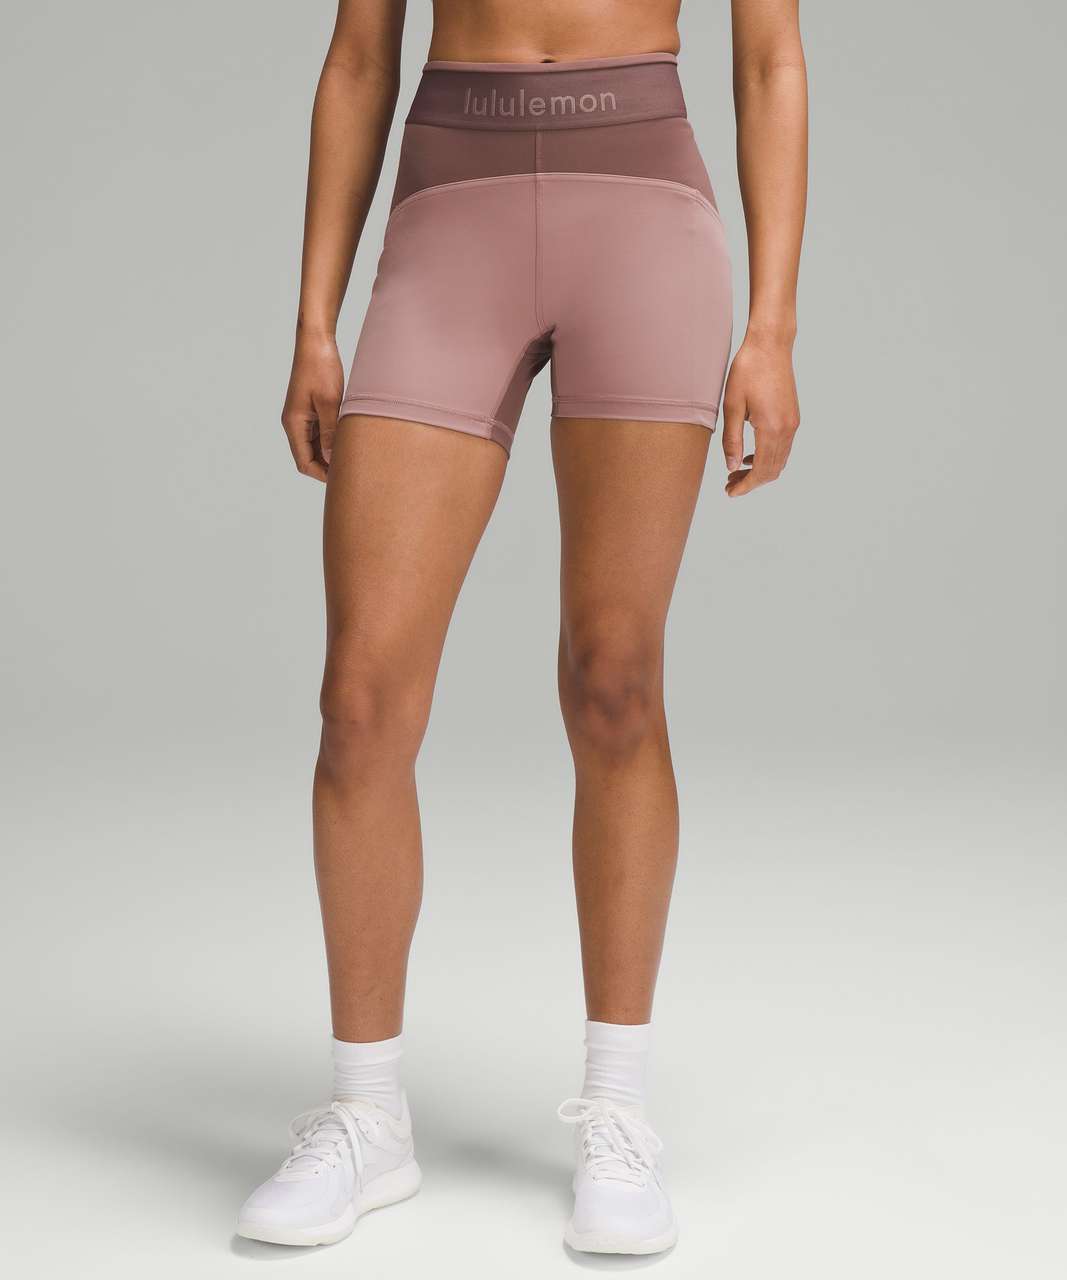 Everlux High Rise Shorts by Lululemon for $45